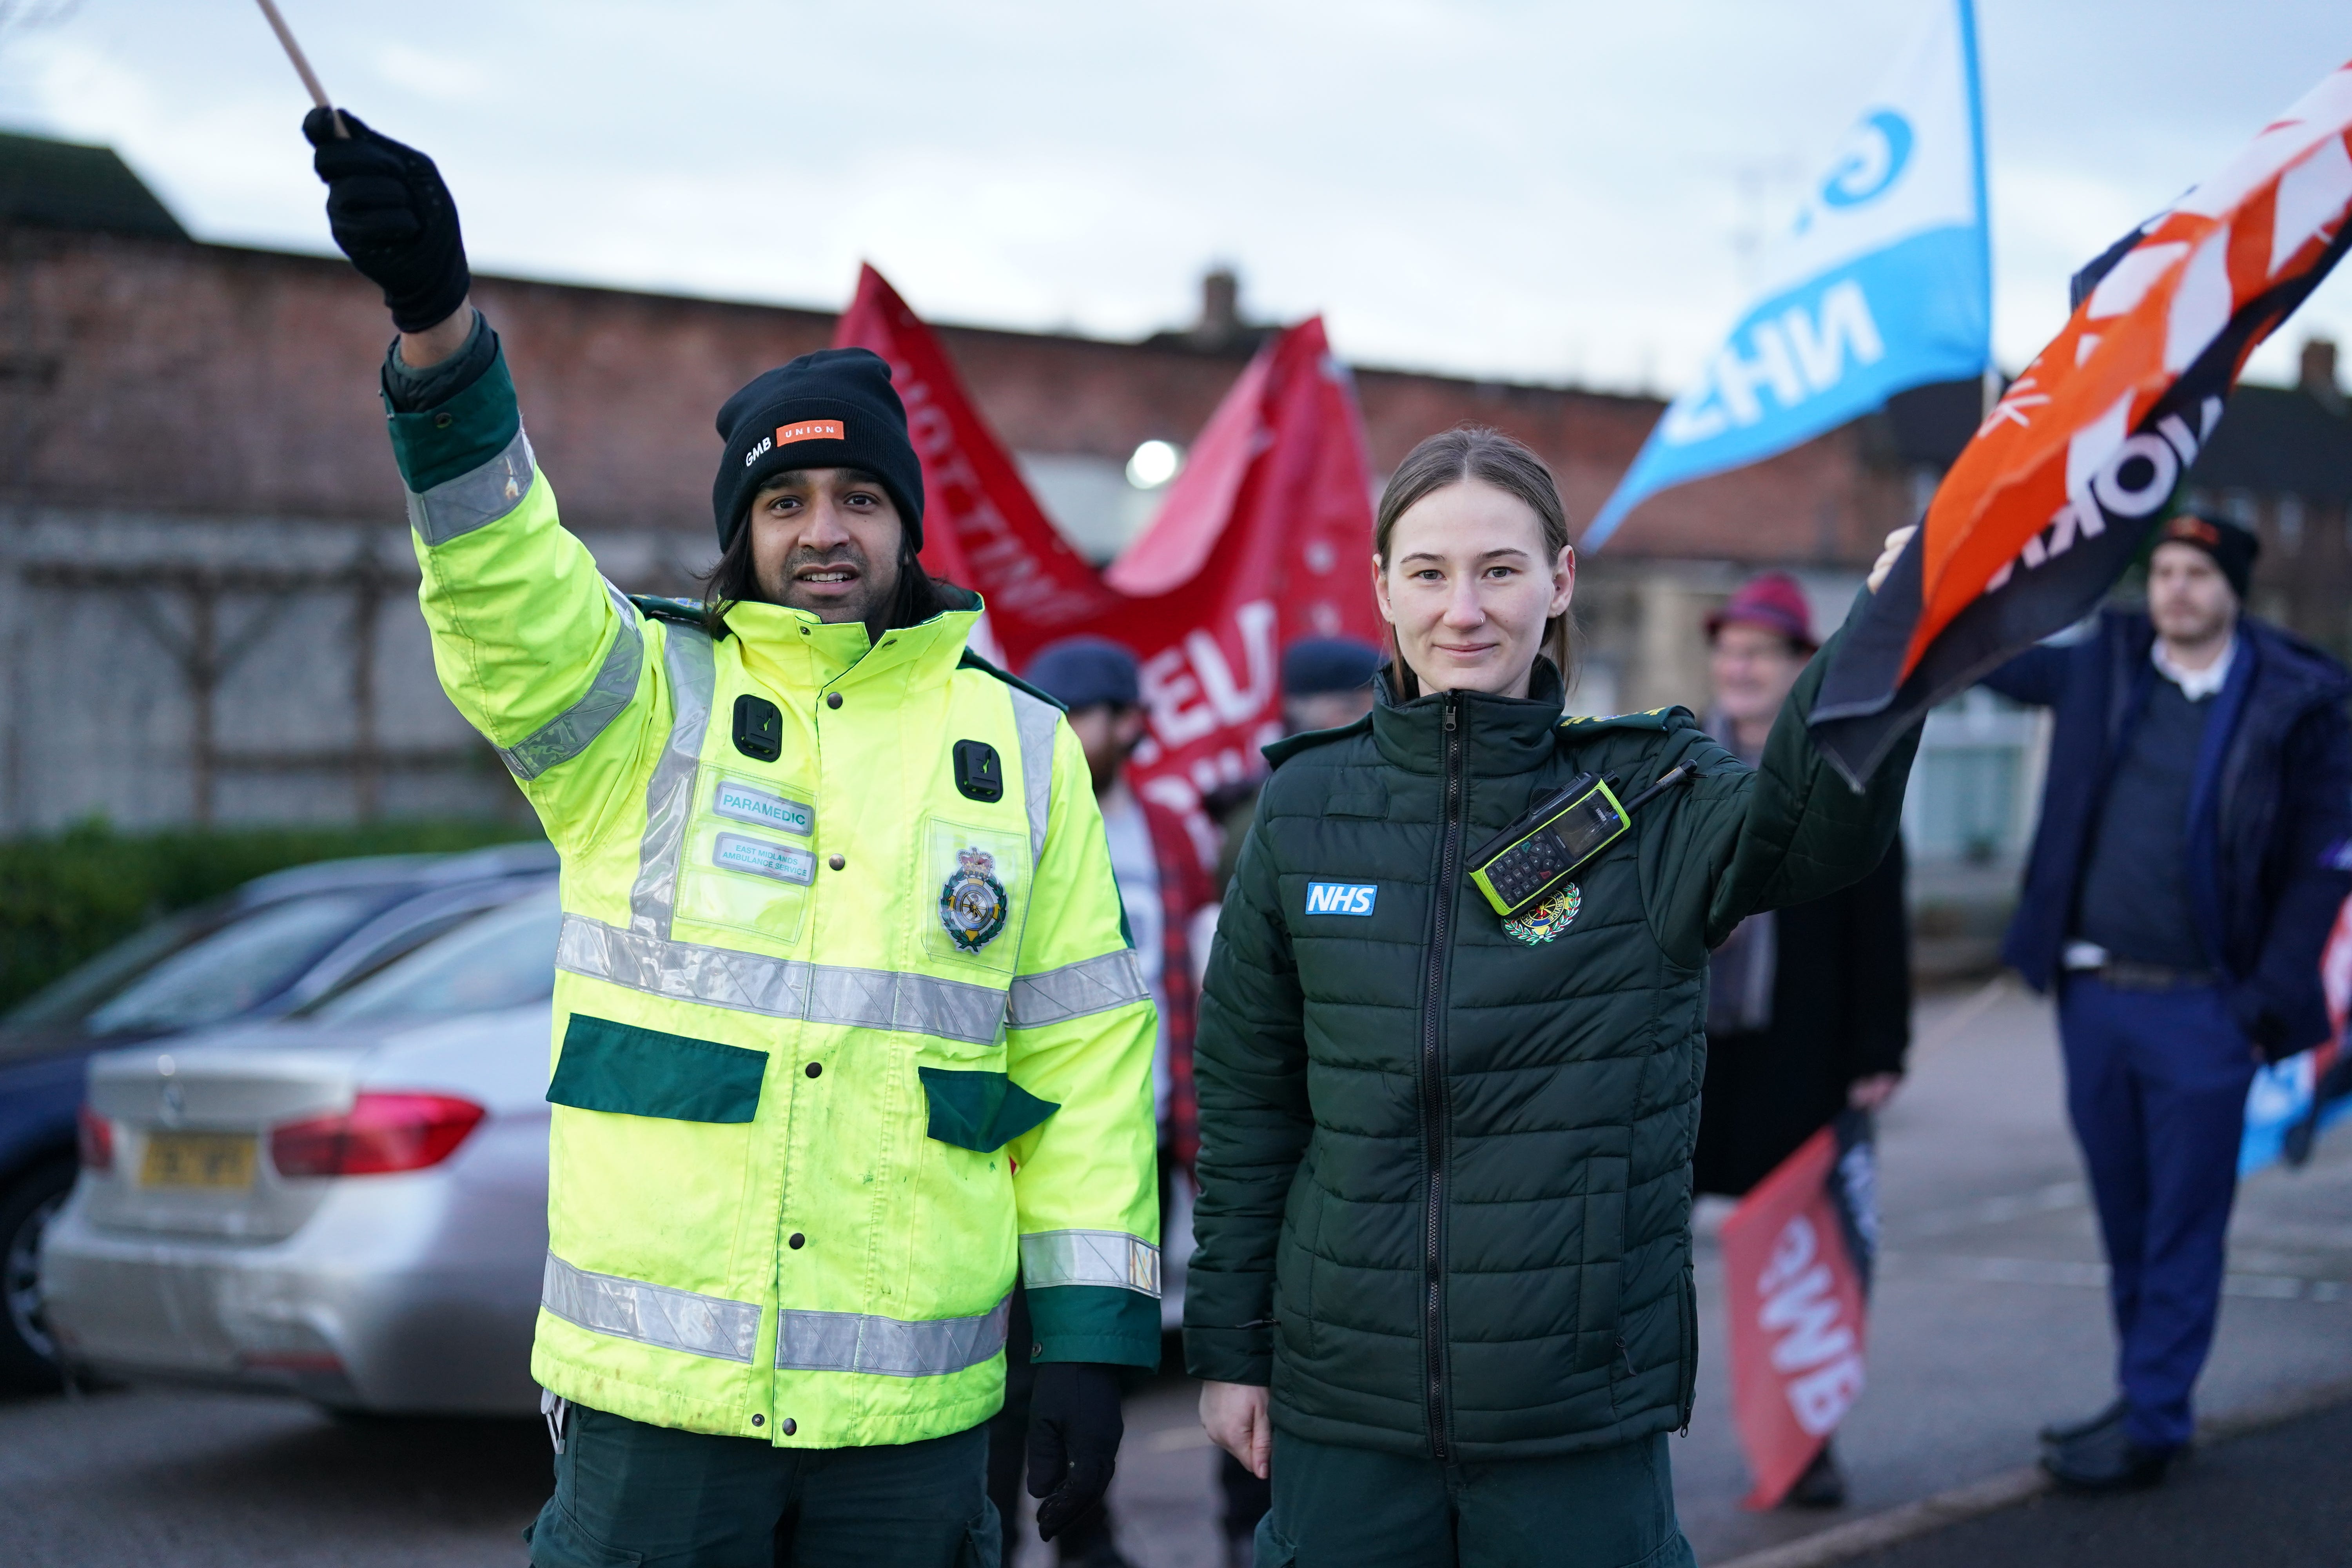 Ambulance workers on the picket line in Nottingham (/PA)